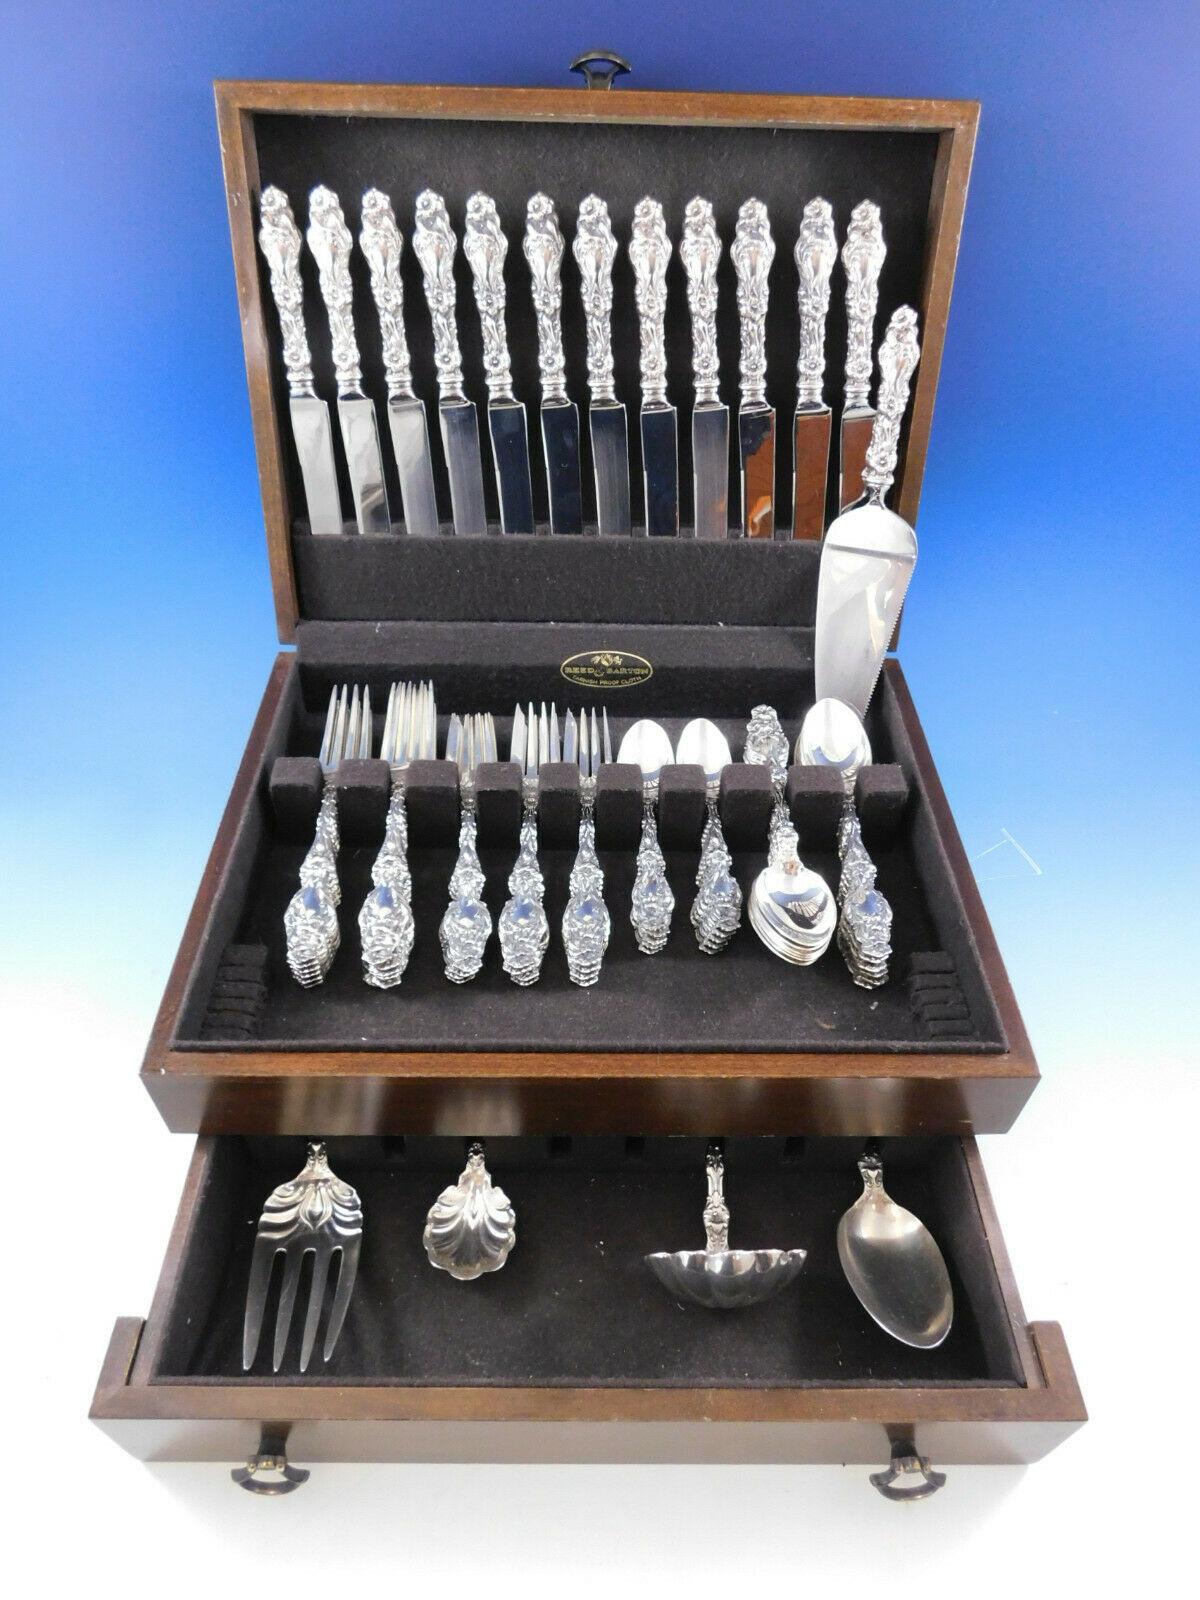 Dinner size lily by Gorham-Whiting sterling silver flatware set - 65 pieces. All of the pieces in this set have the newer Gorham hallmark, except for 2 teaspoons, which are hallmarked Whiting.

This set includes:

12 dinner knives, 9 3/8